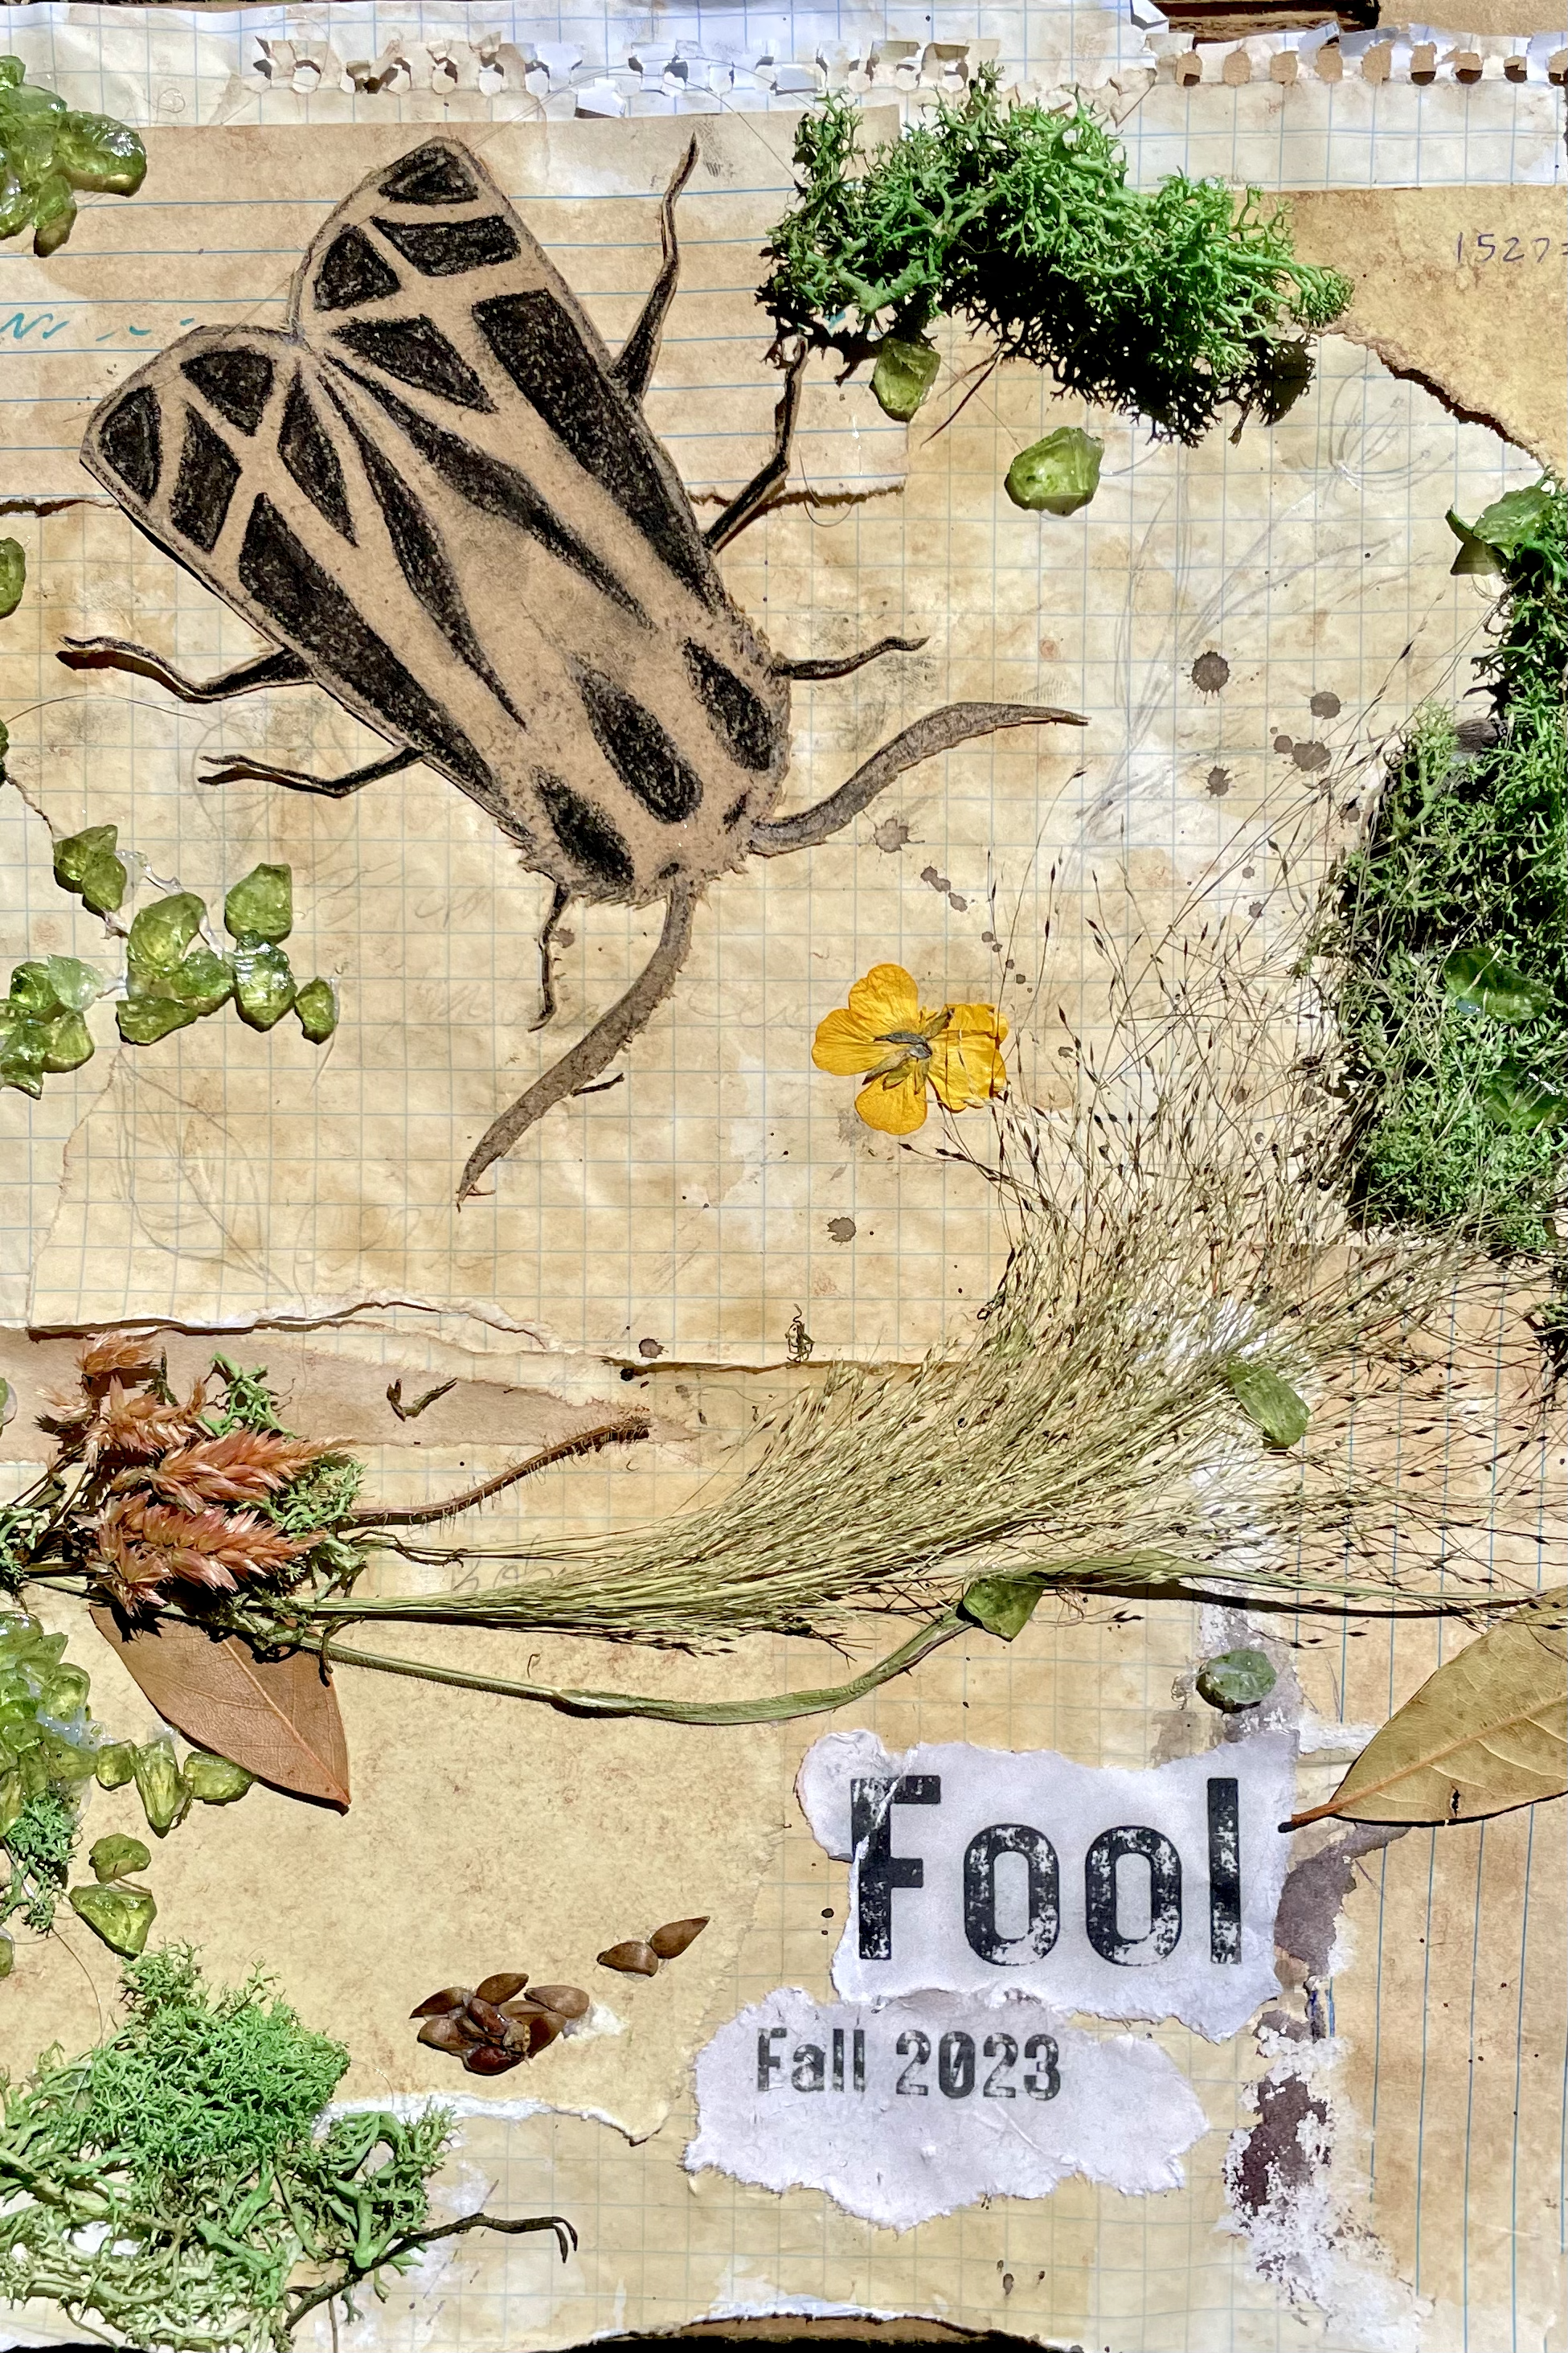 the cover of the third edition of the fool